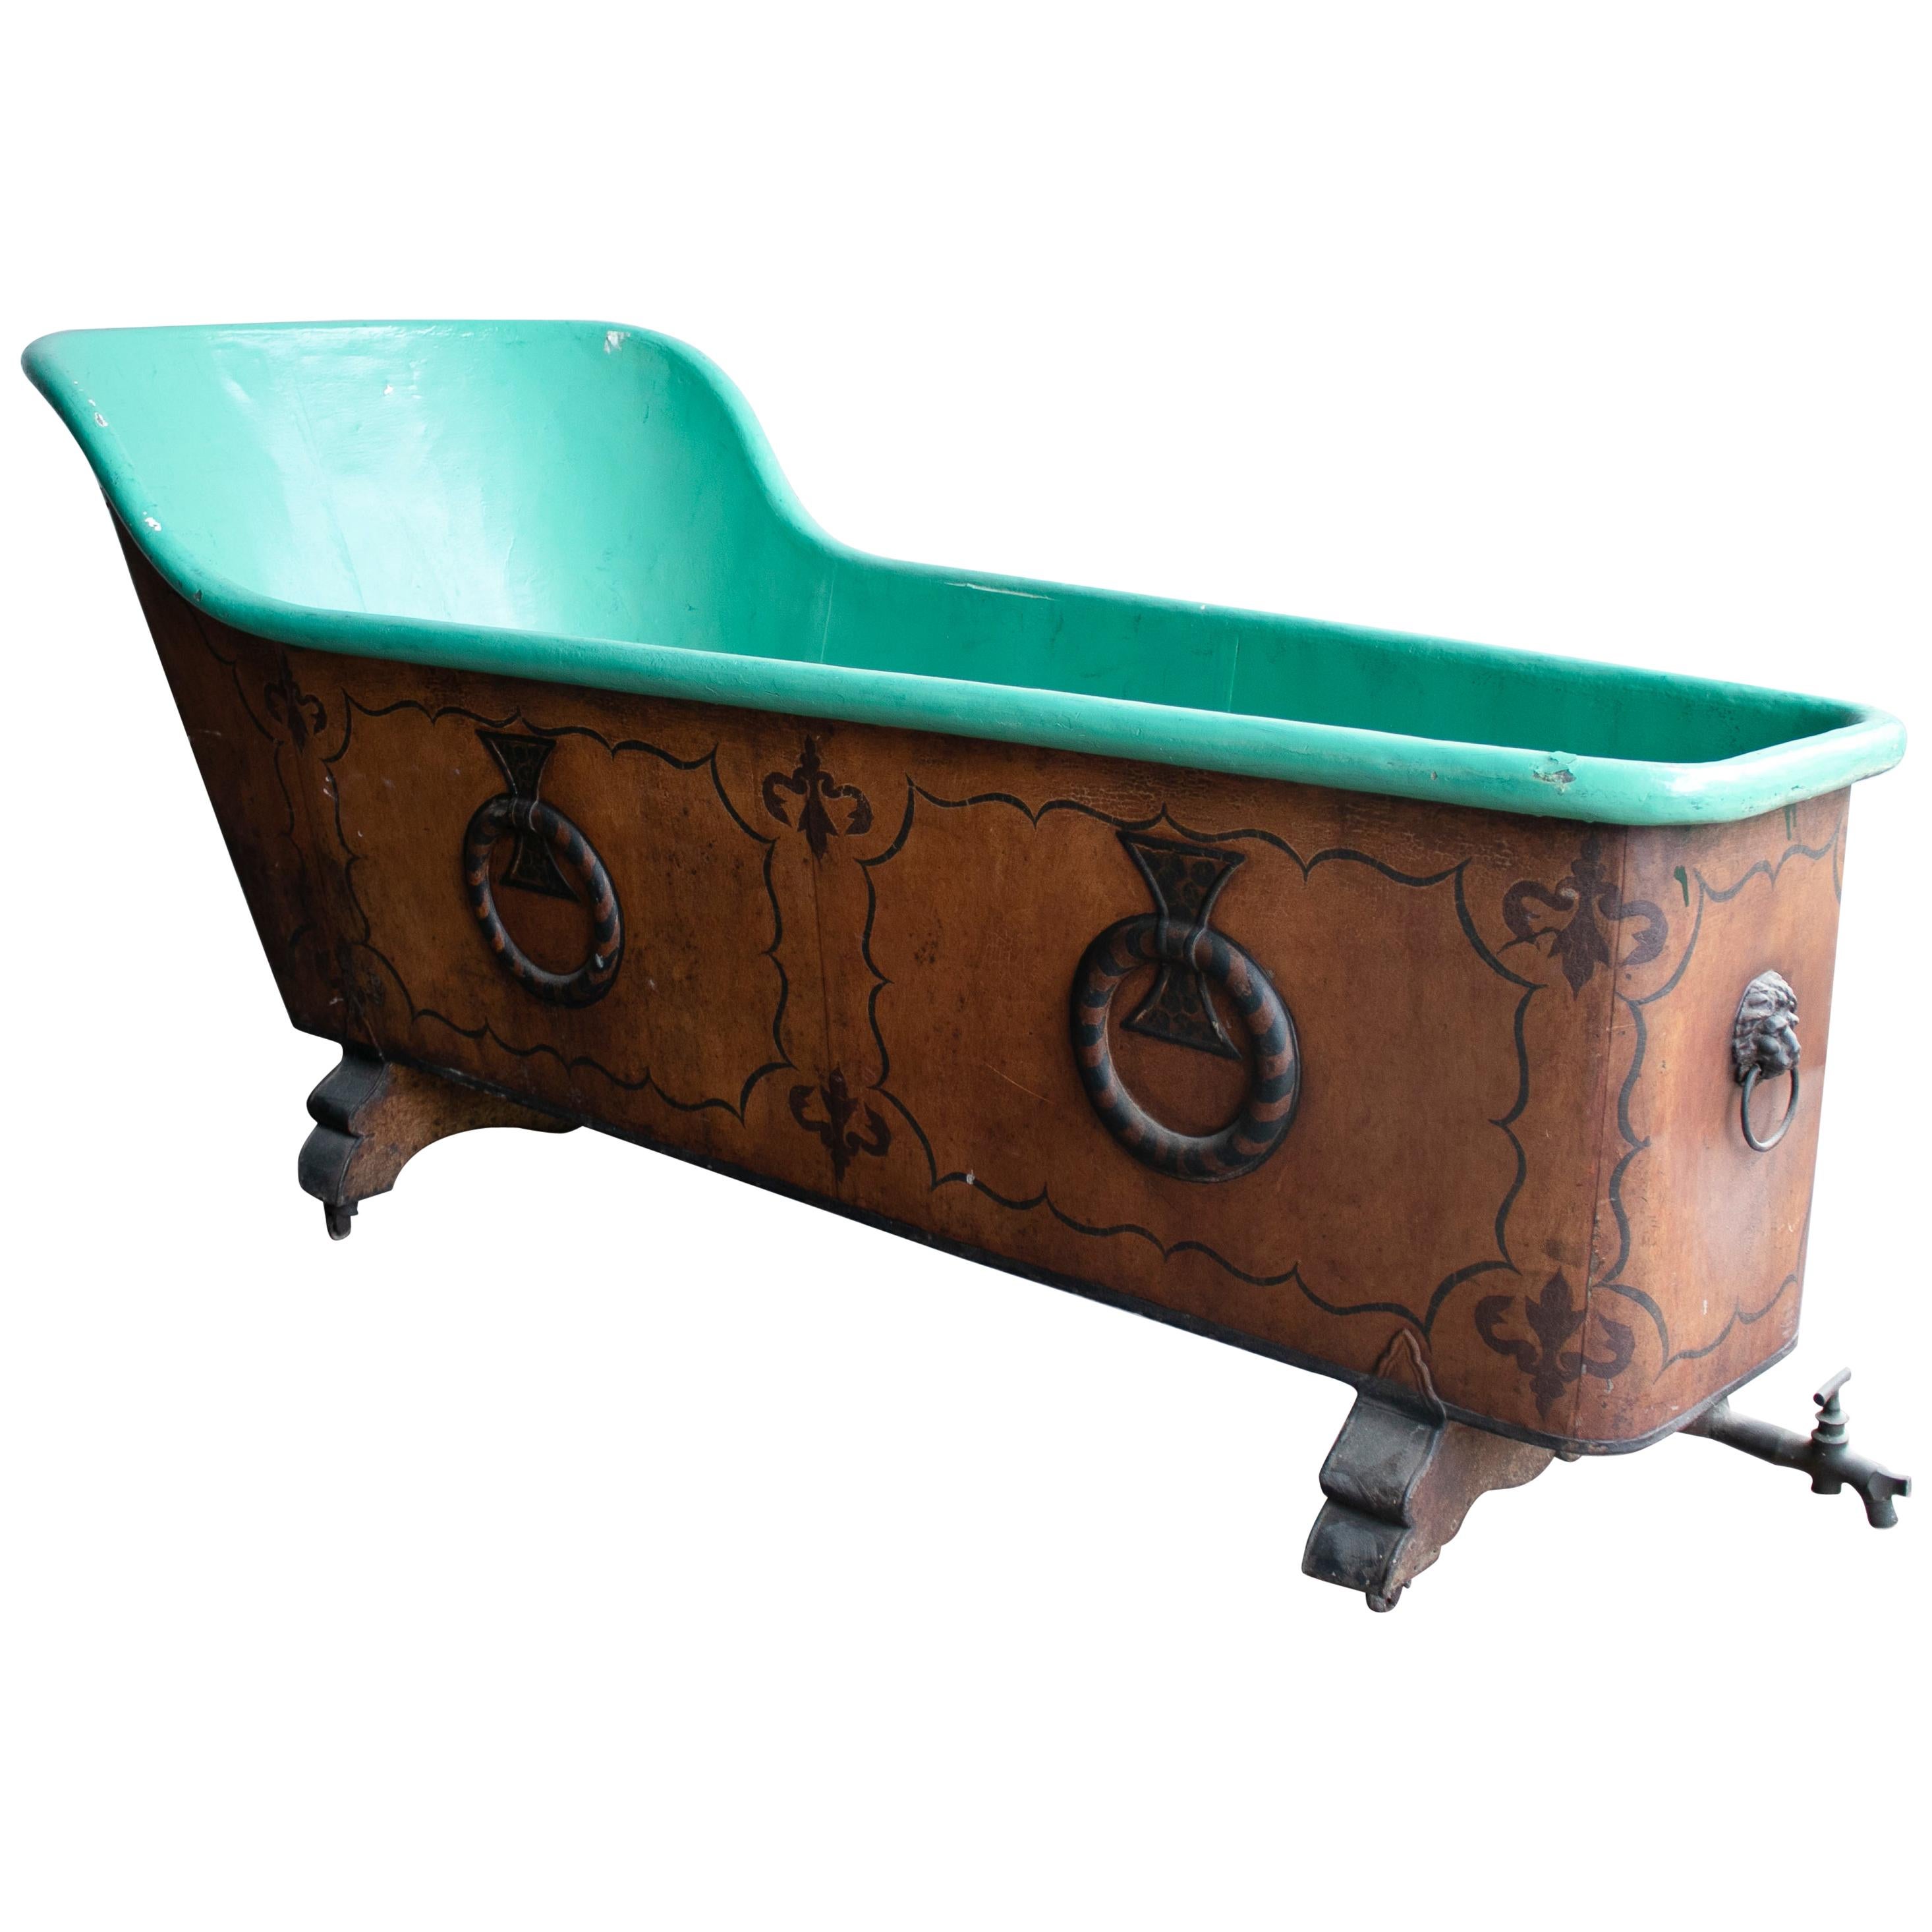 1950s French Green Zinc Decorated, What Were Bathtubs Made Of In 1950